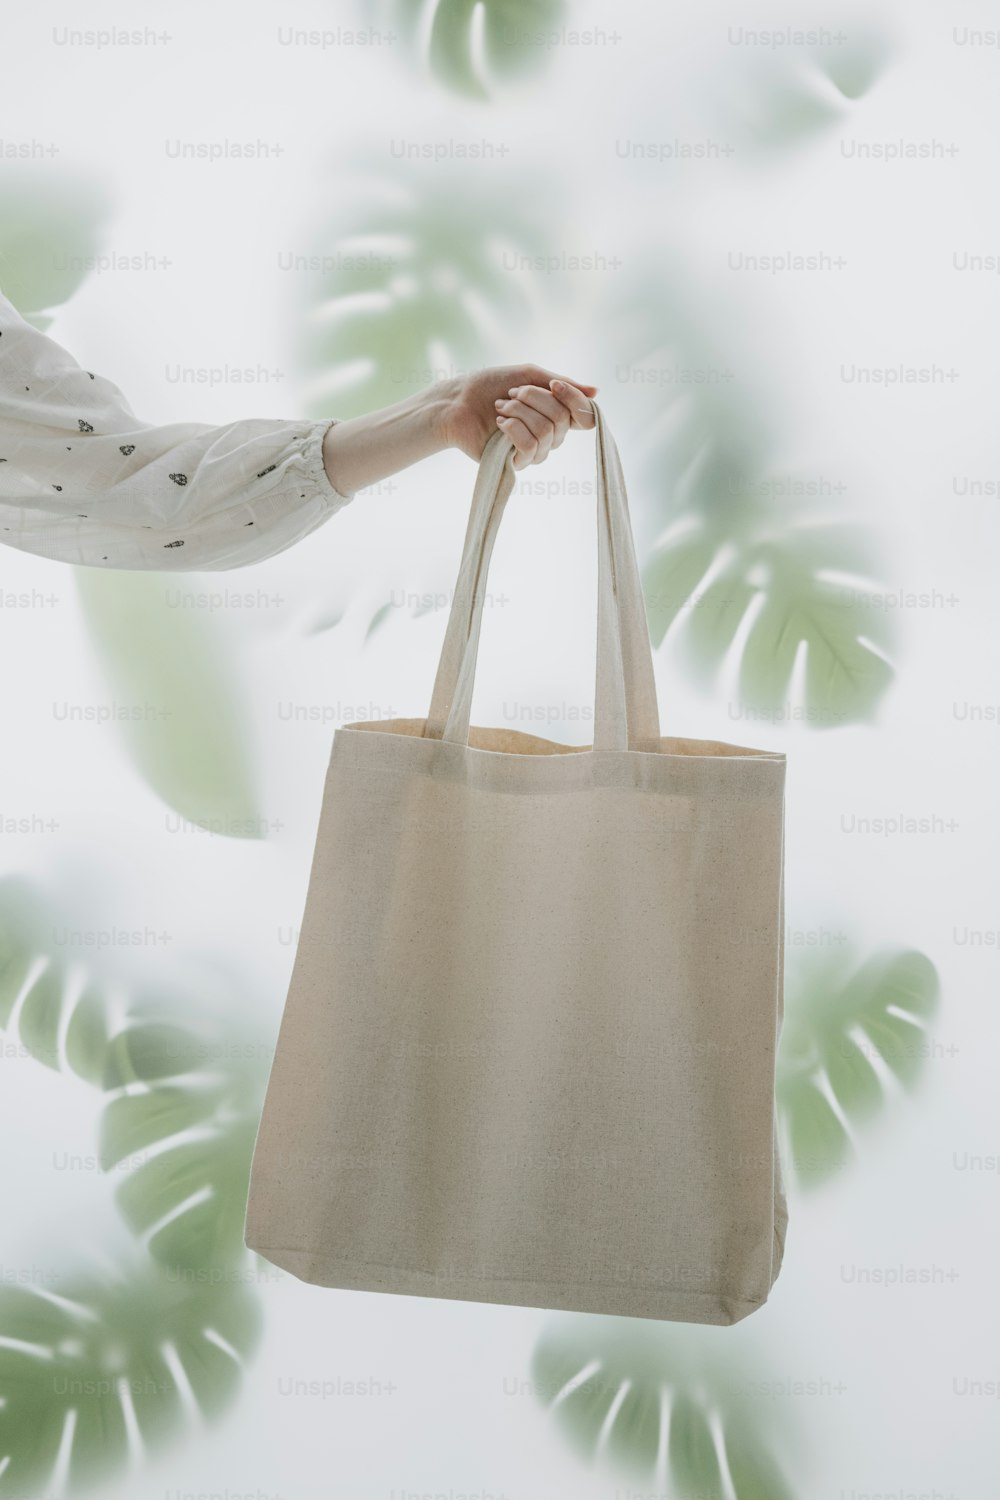 a person holding a bag in front of a plant